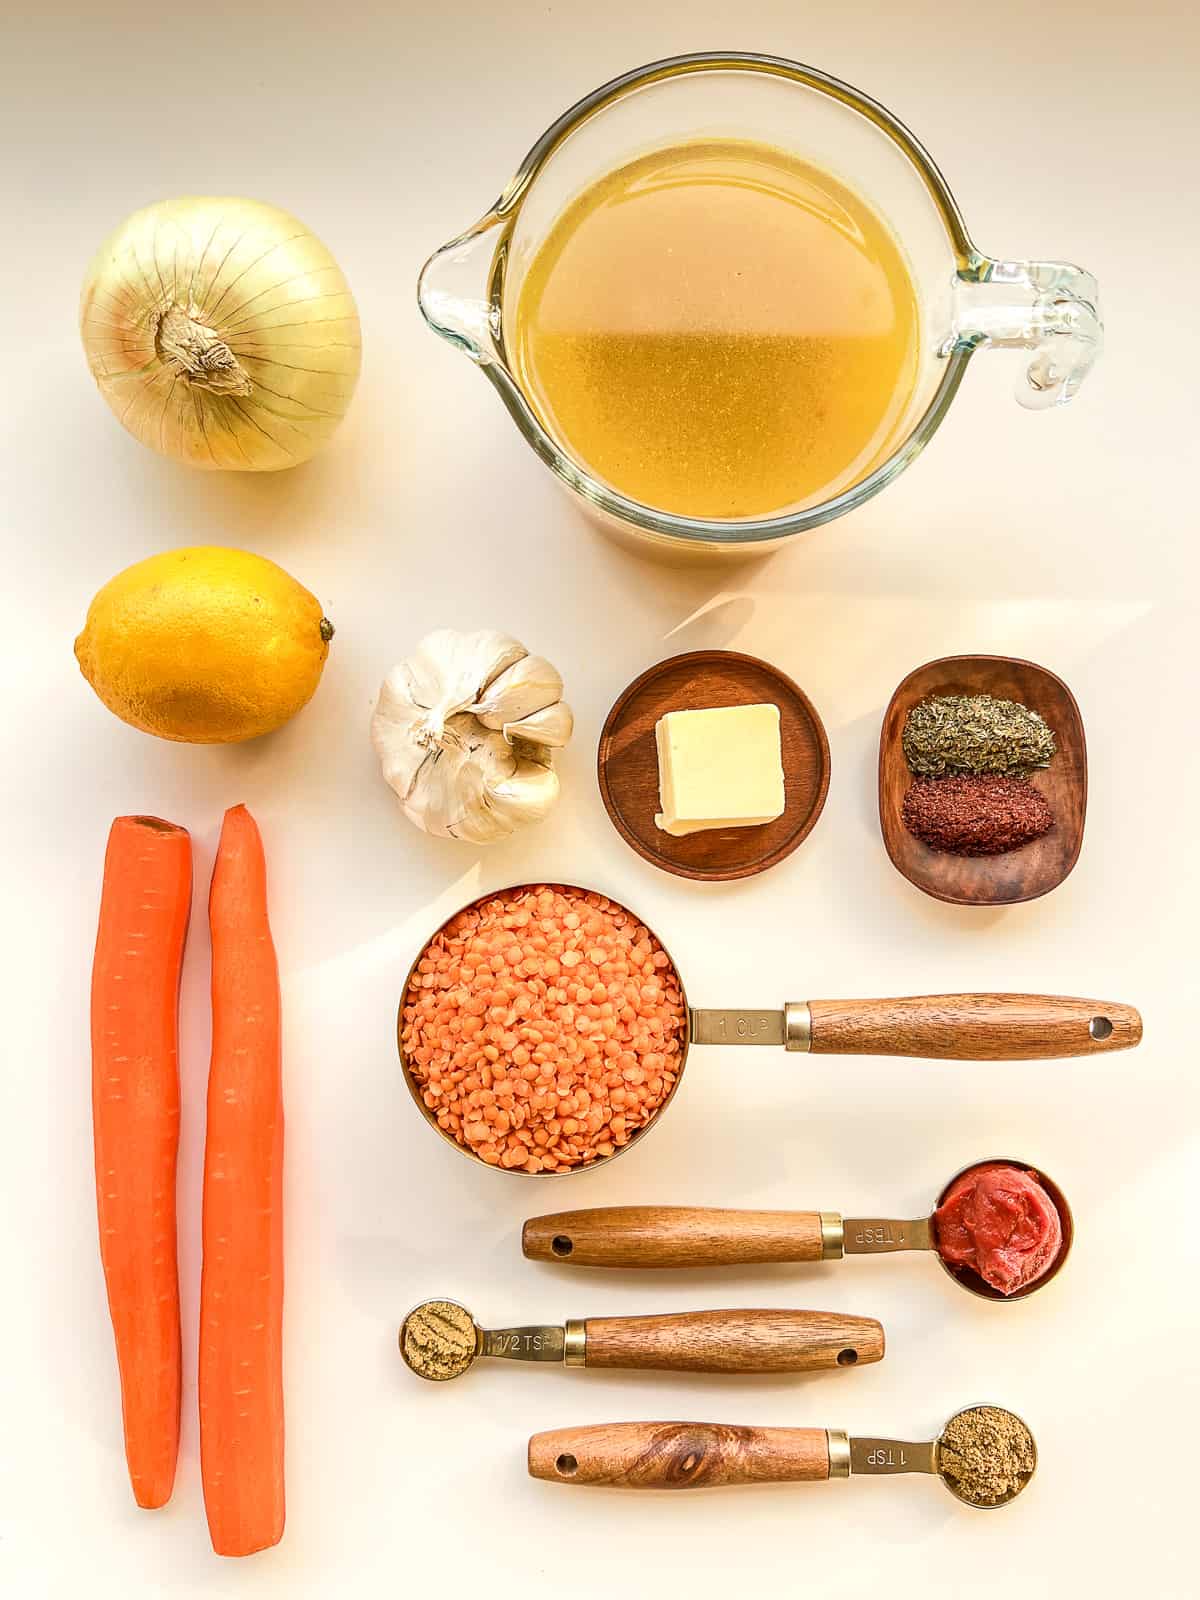 An image of the ingredients needed to make lentil soup against a white background.